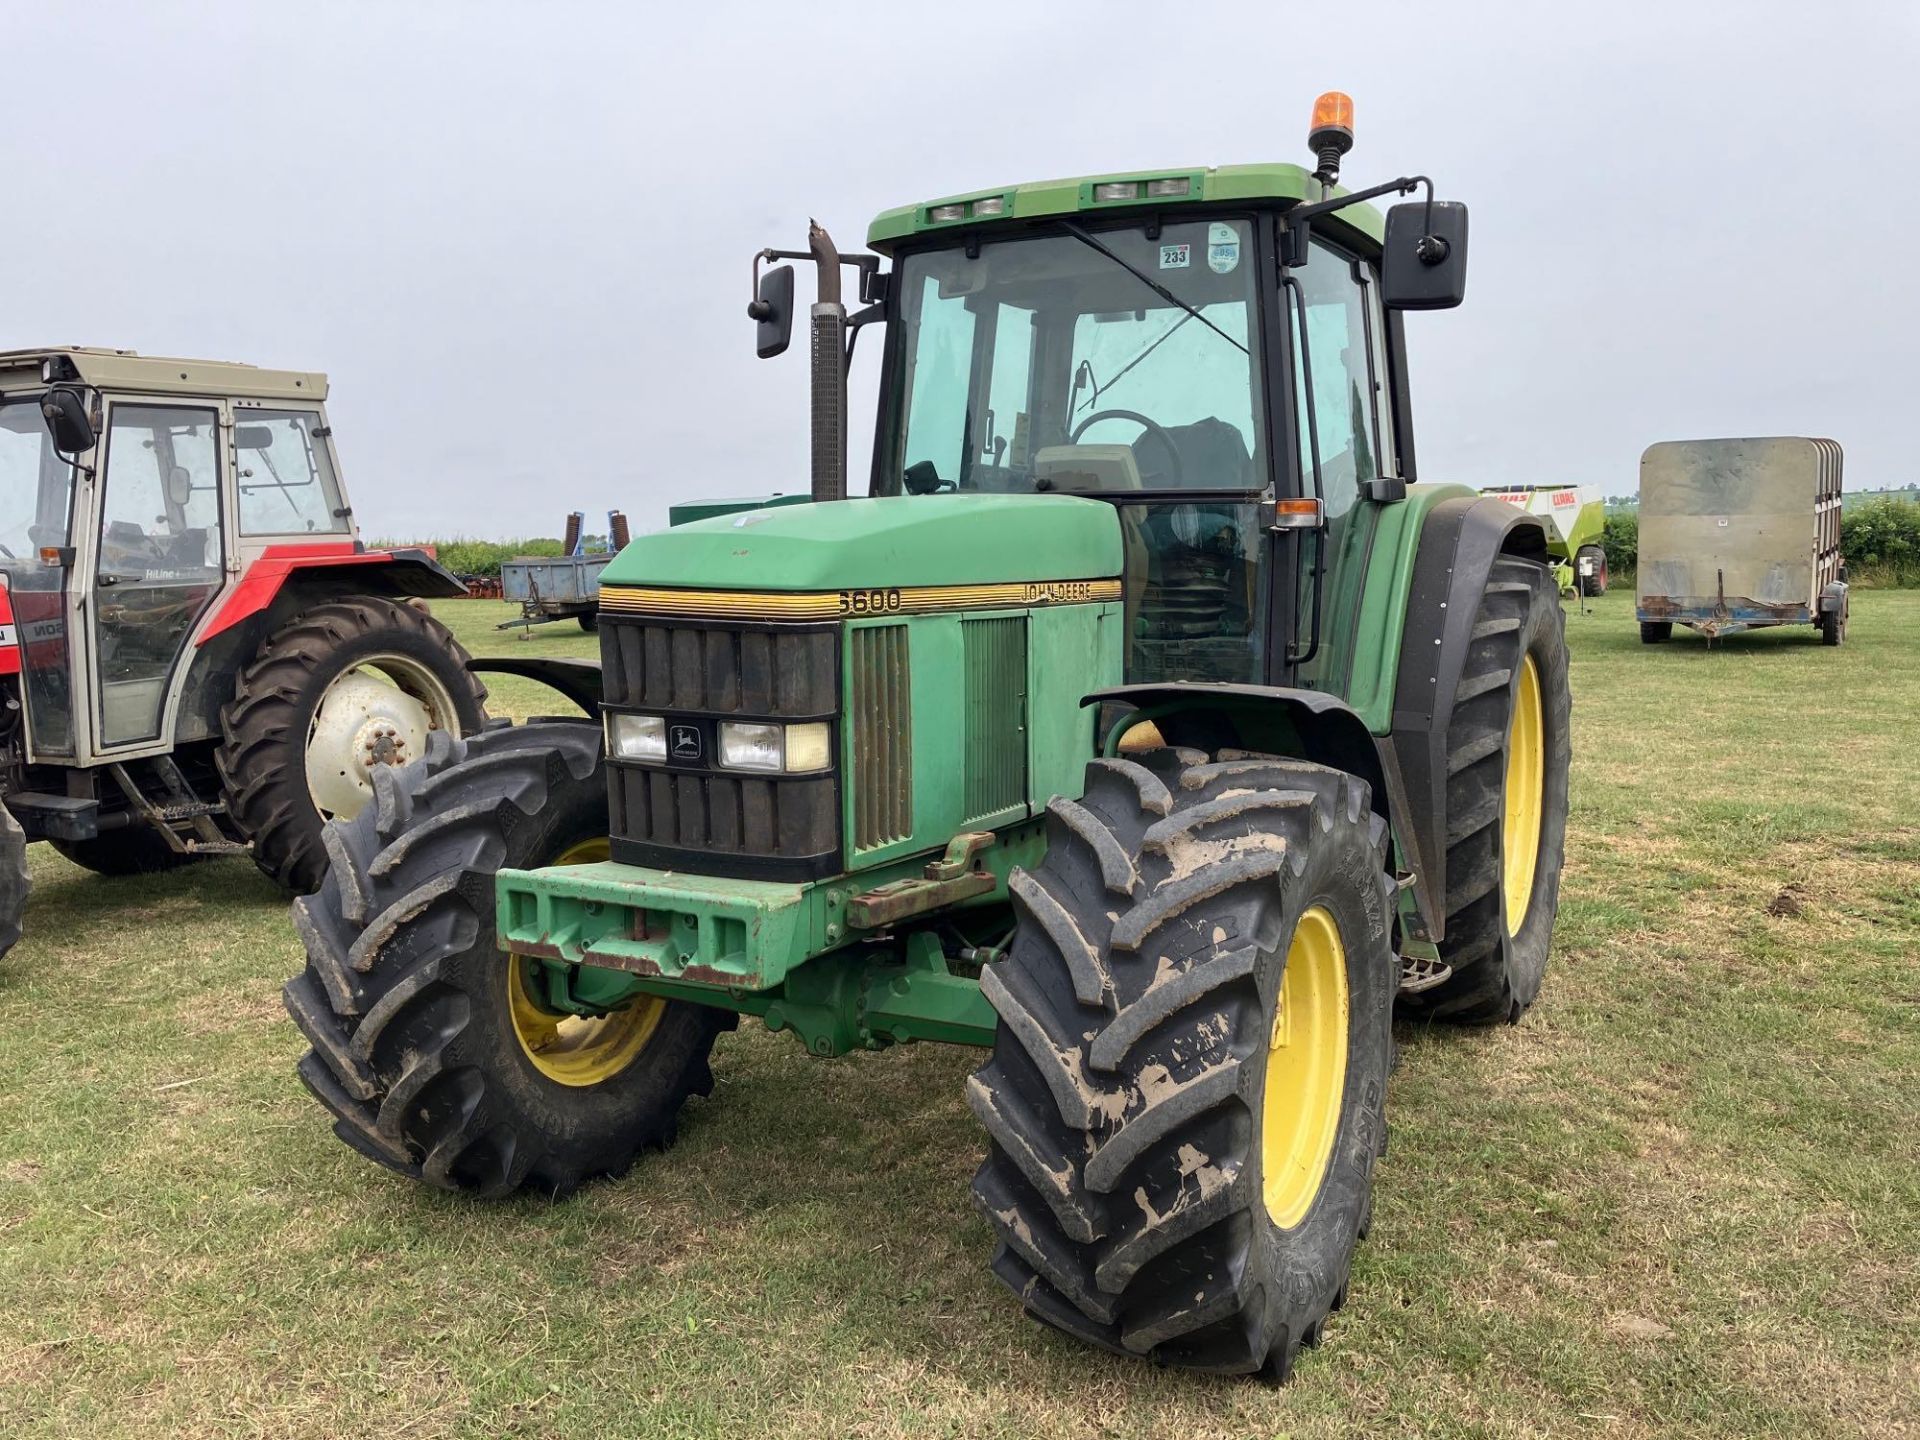 1996 John Deere 6600 Powerquad 4wd tractor with 3 manual spools and PUH on 540/65R24 front and 600/6